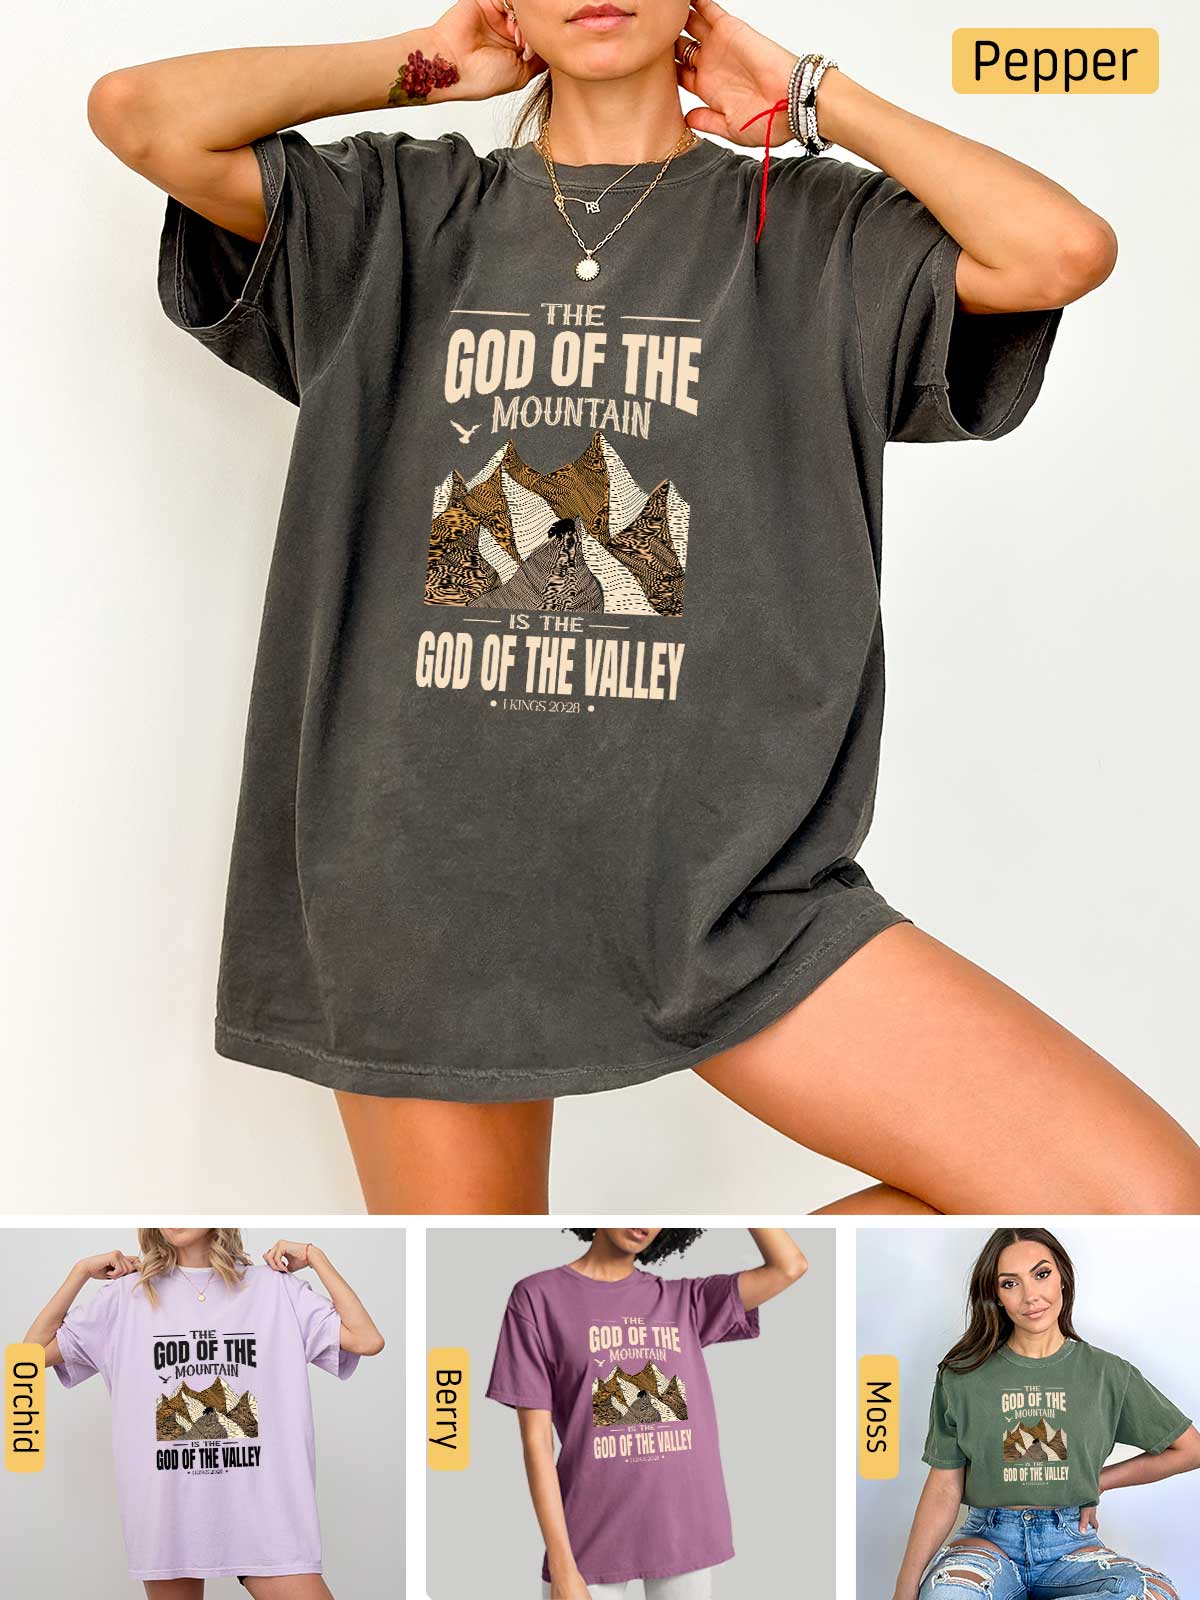 a woman wearing a shirt that says god of the mountain